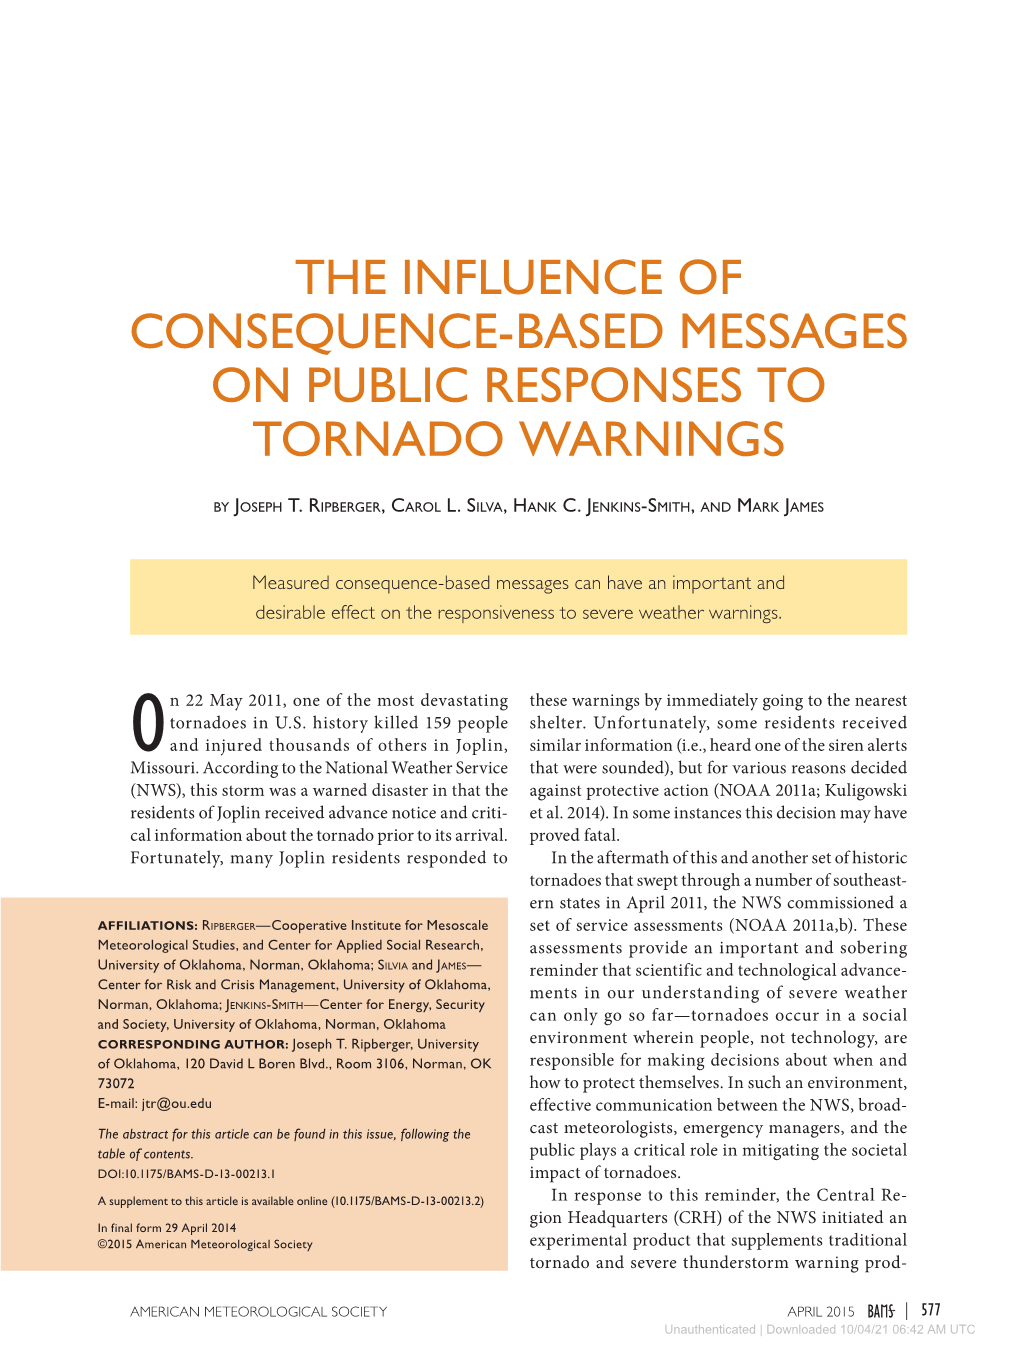 The Influence of Consequence-Based Messages on Public Responses to Tornado Warnings